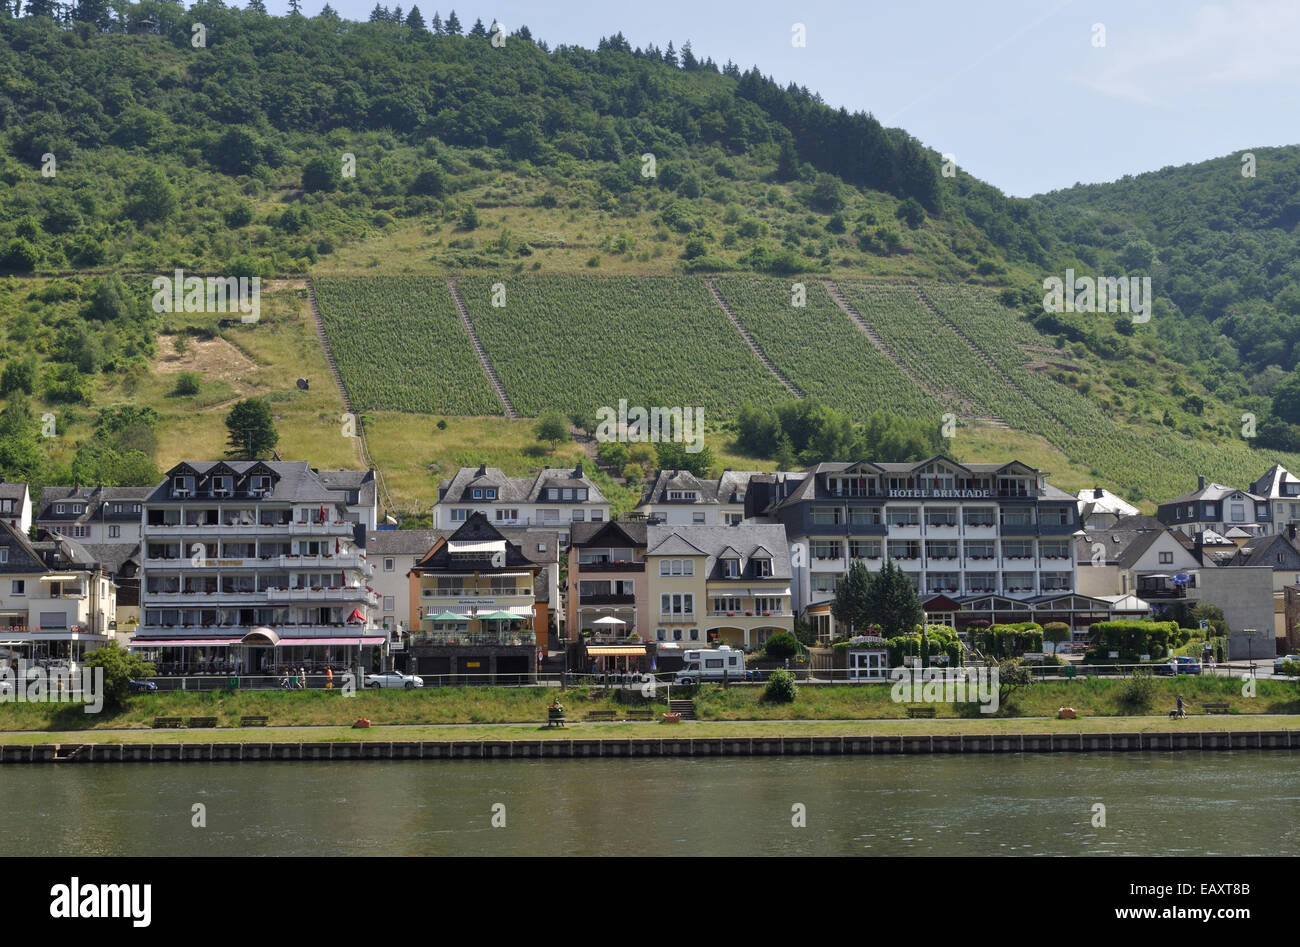 Hotels Triton and Brixiade on the bank of the Moselle in the Cond district of Cochem, Germany. Stock Photo